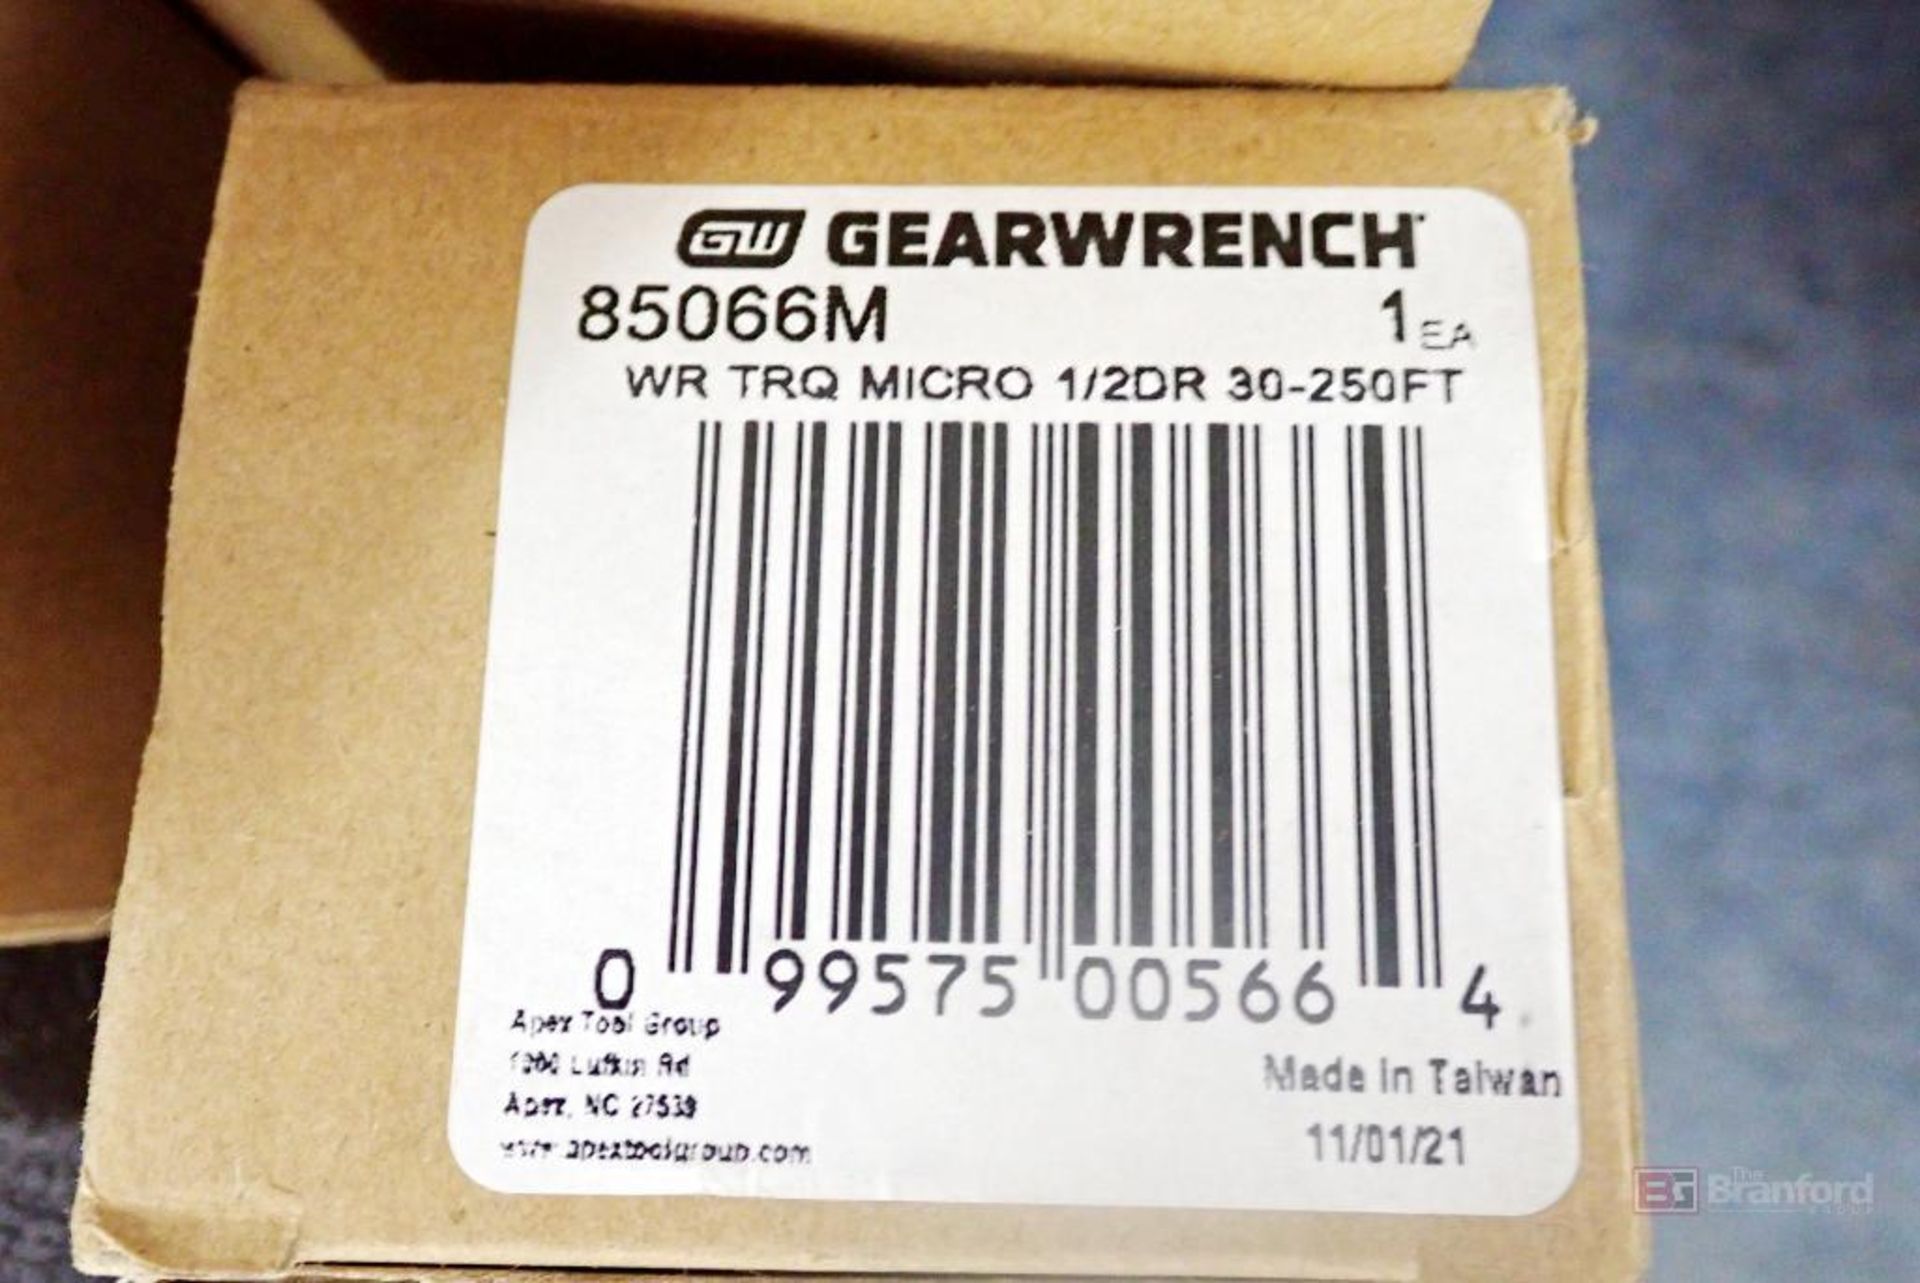 GearWrench 85066M (8612115) 1/2" Drive Micrometer Torque Wrench - Image 3 of 5